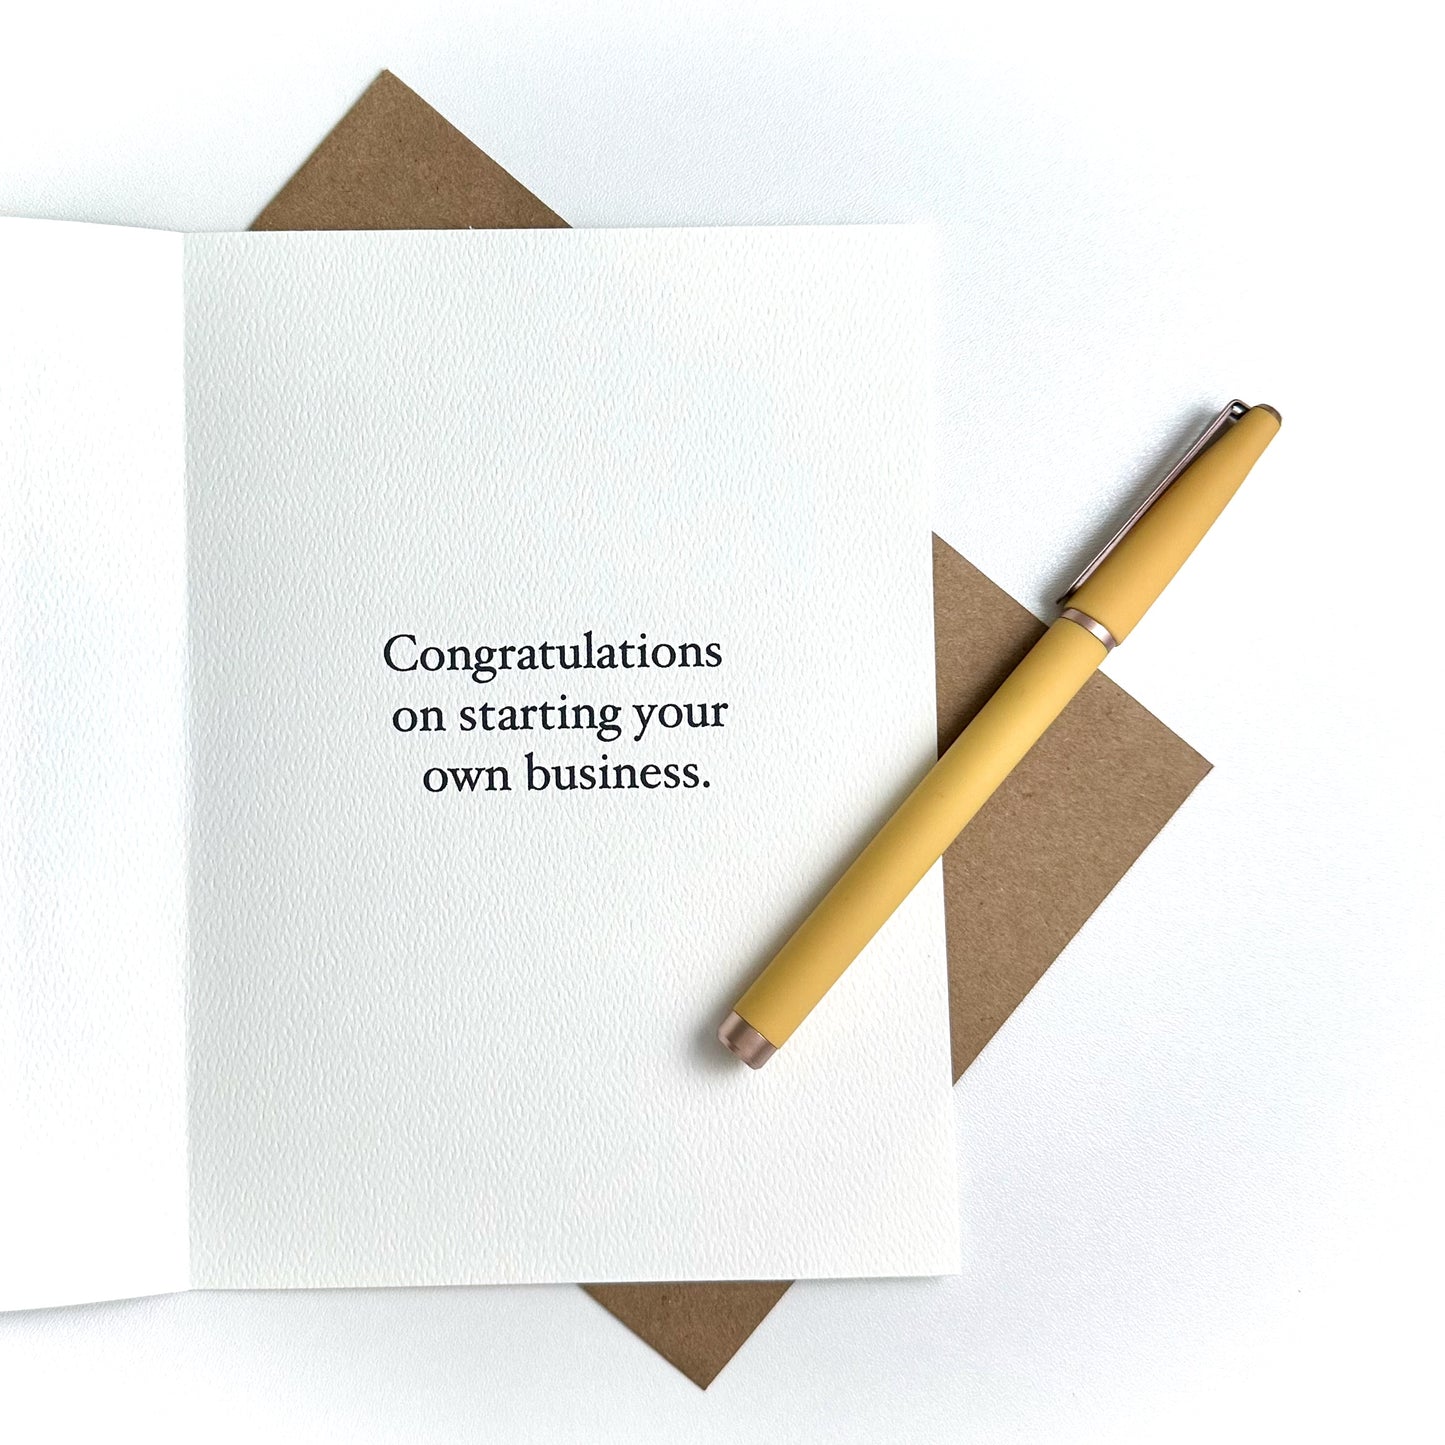 New Small Business Congrats Greeting Card